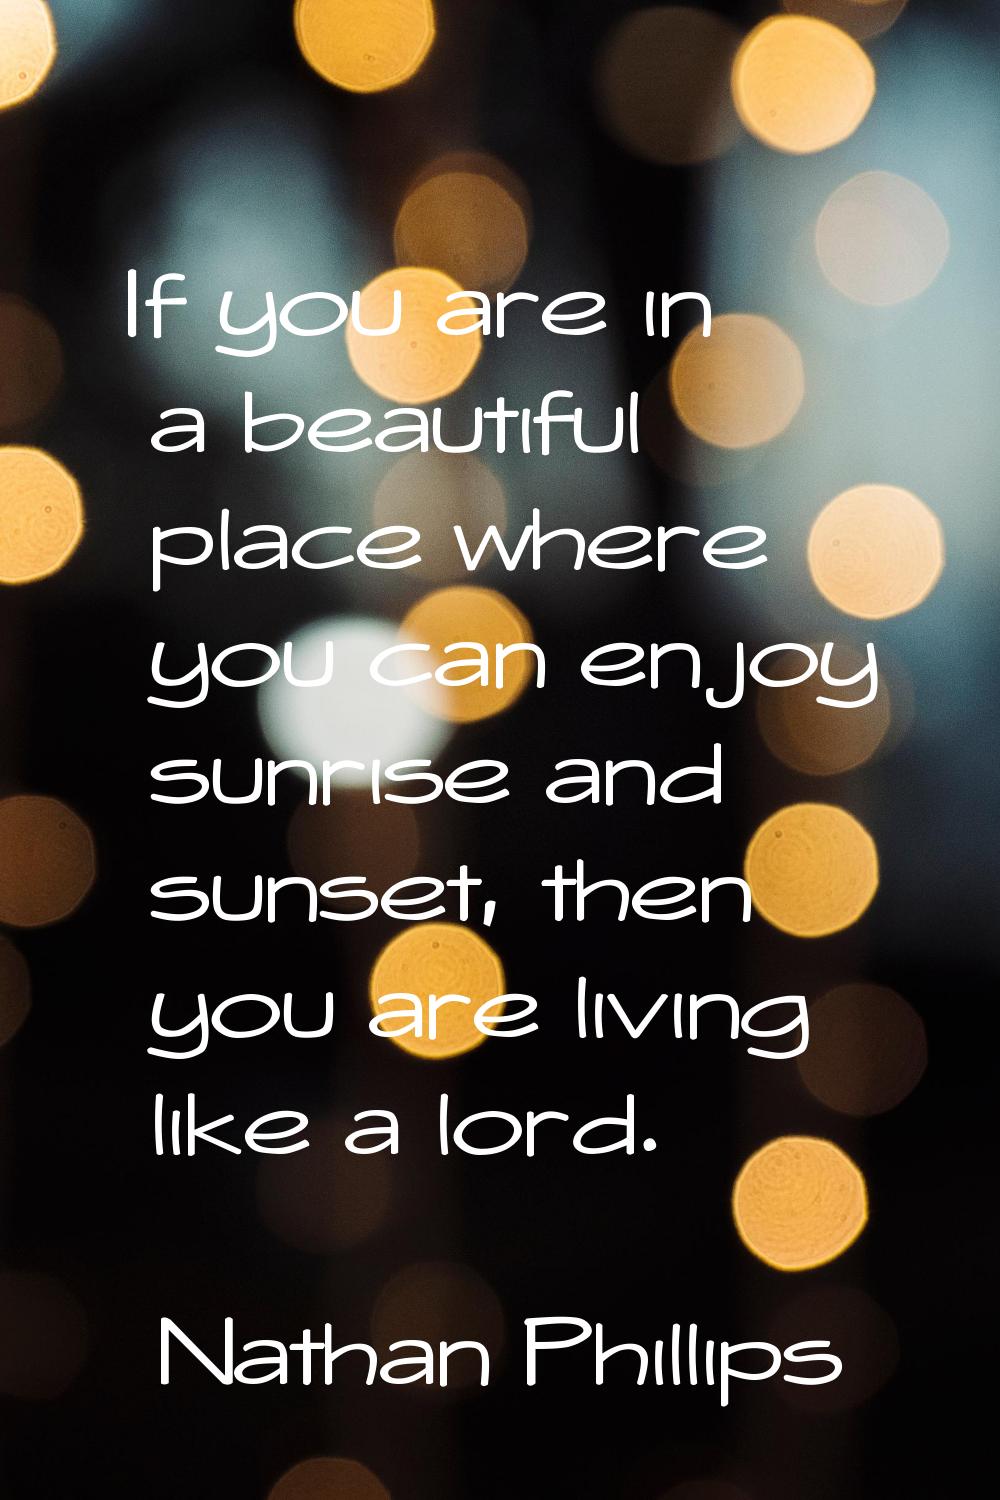 If you are in a beautiful place where you can enjoy sunrise and sunset, then you are living like a 